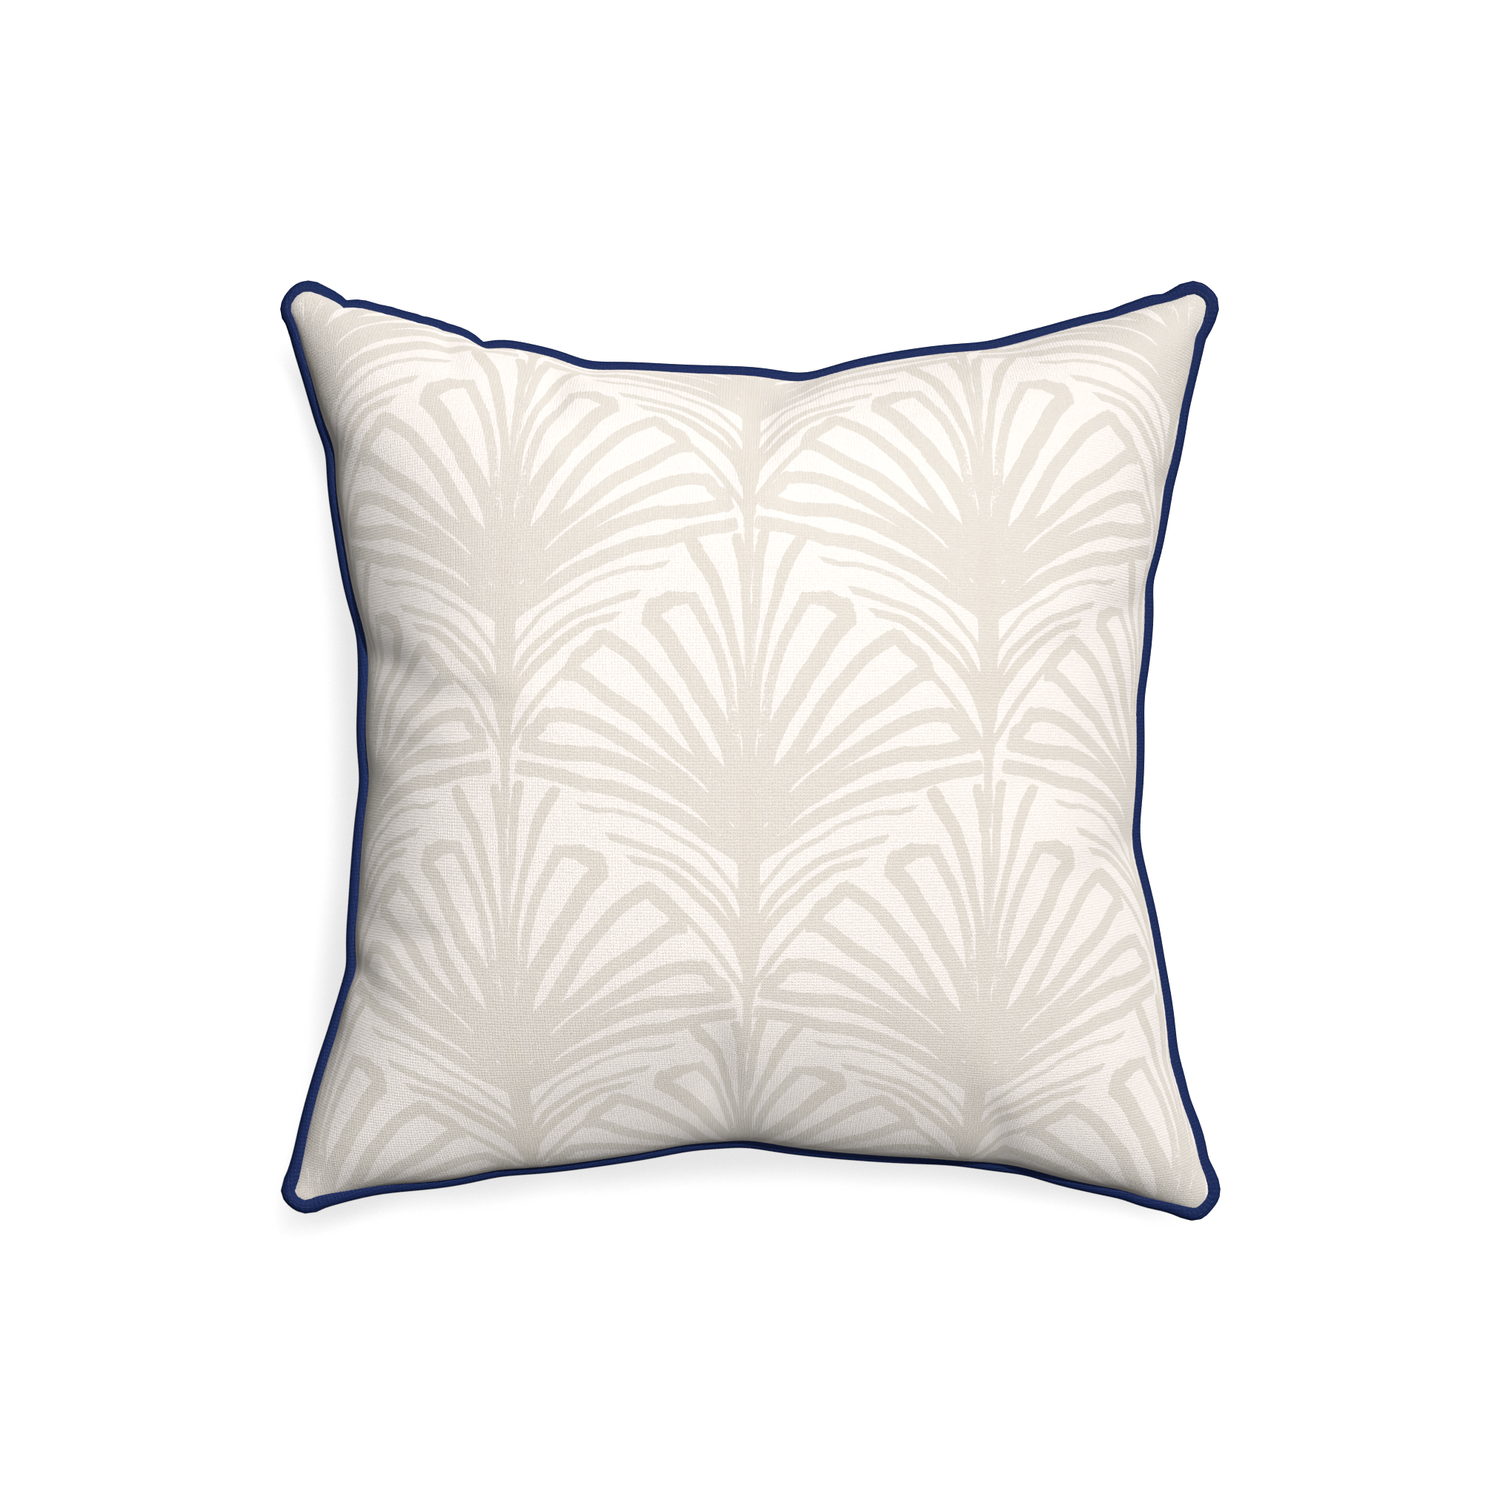 20-square suzy sand custom pillow with midnight piping on white background